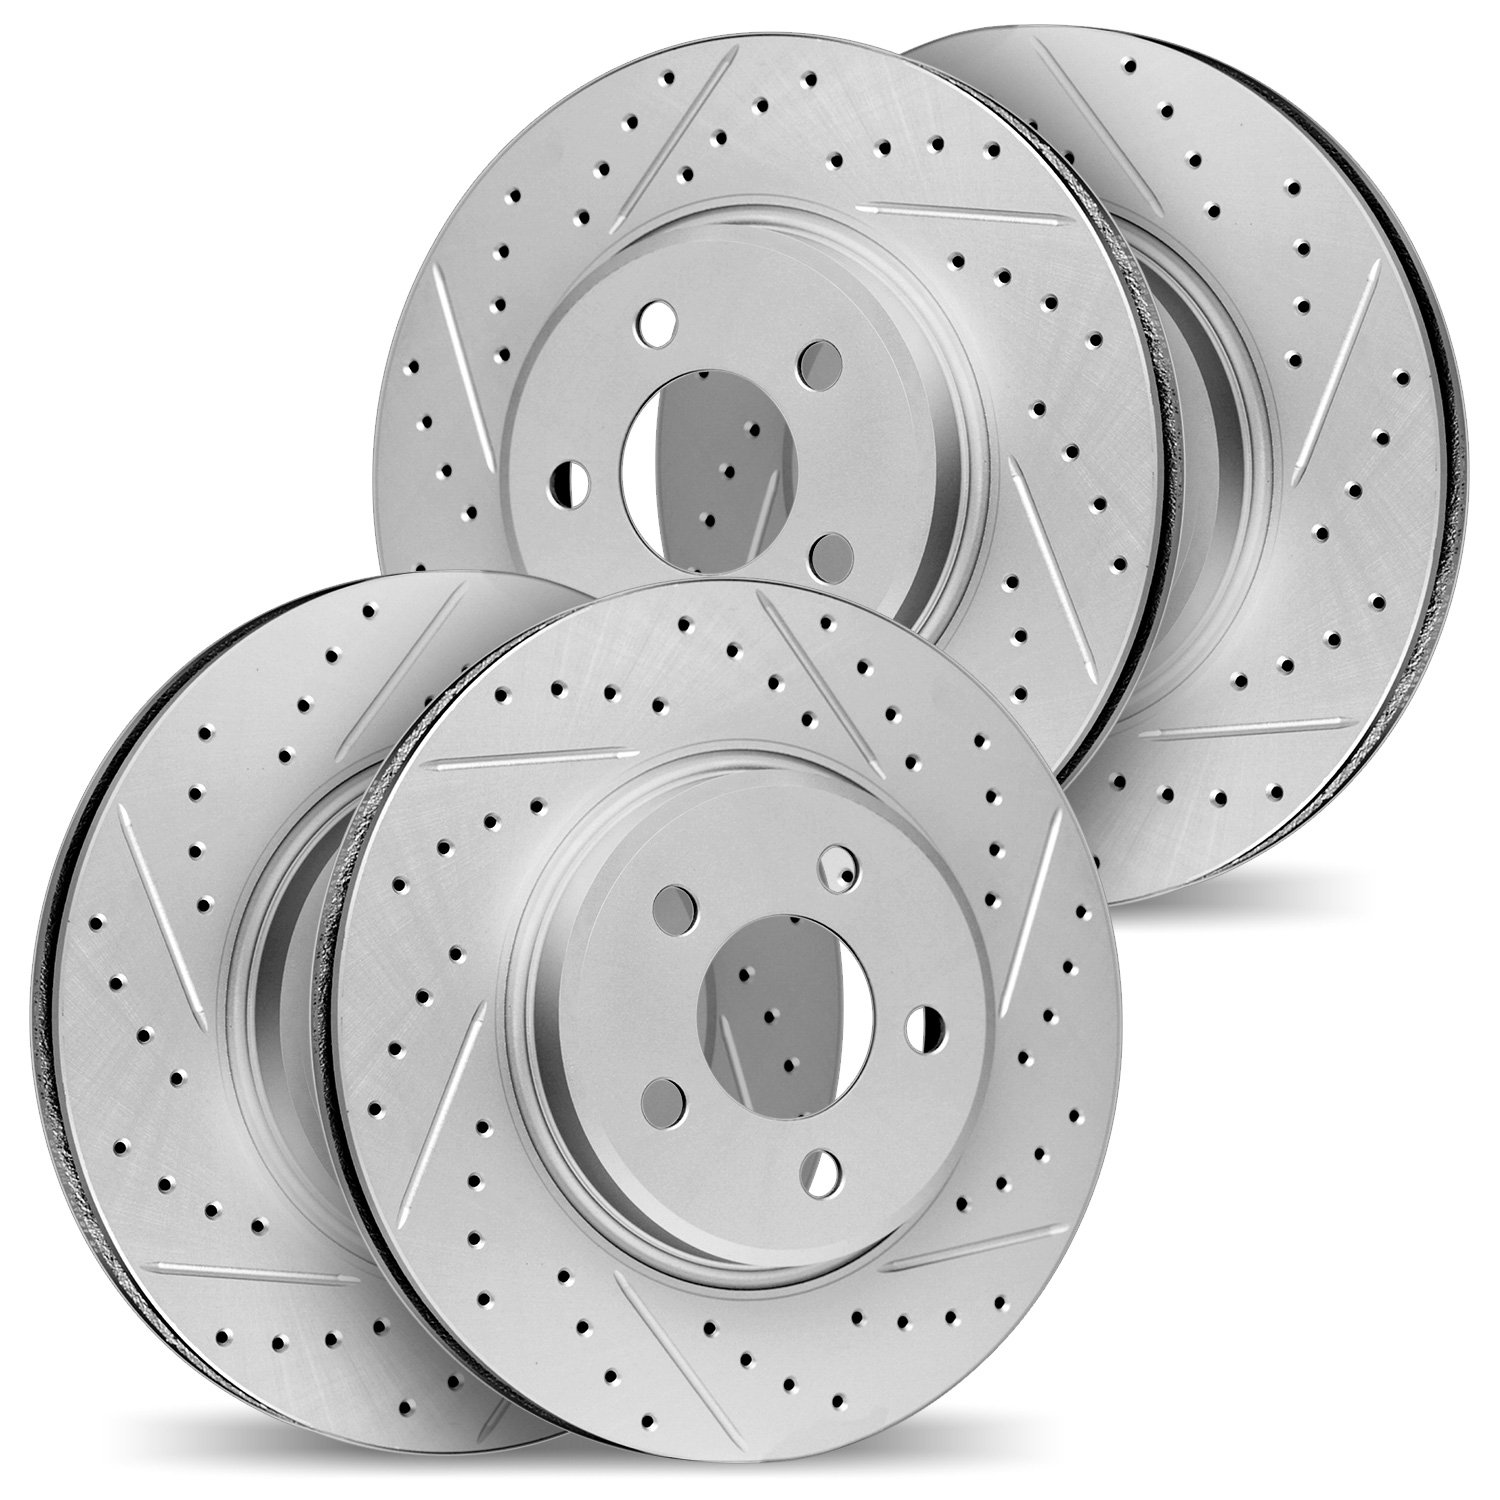 2004-31023 Geoperformance Drilled/Slotted Brake Rotors, 2013-2018 BMW, Position: Front and Rear